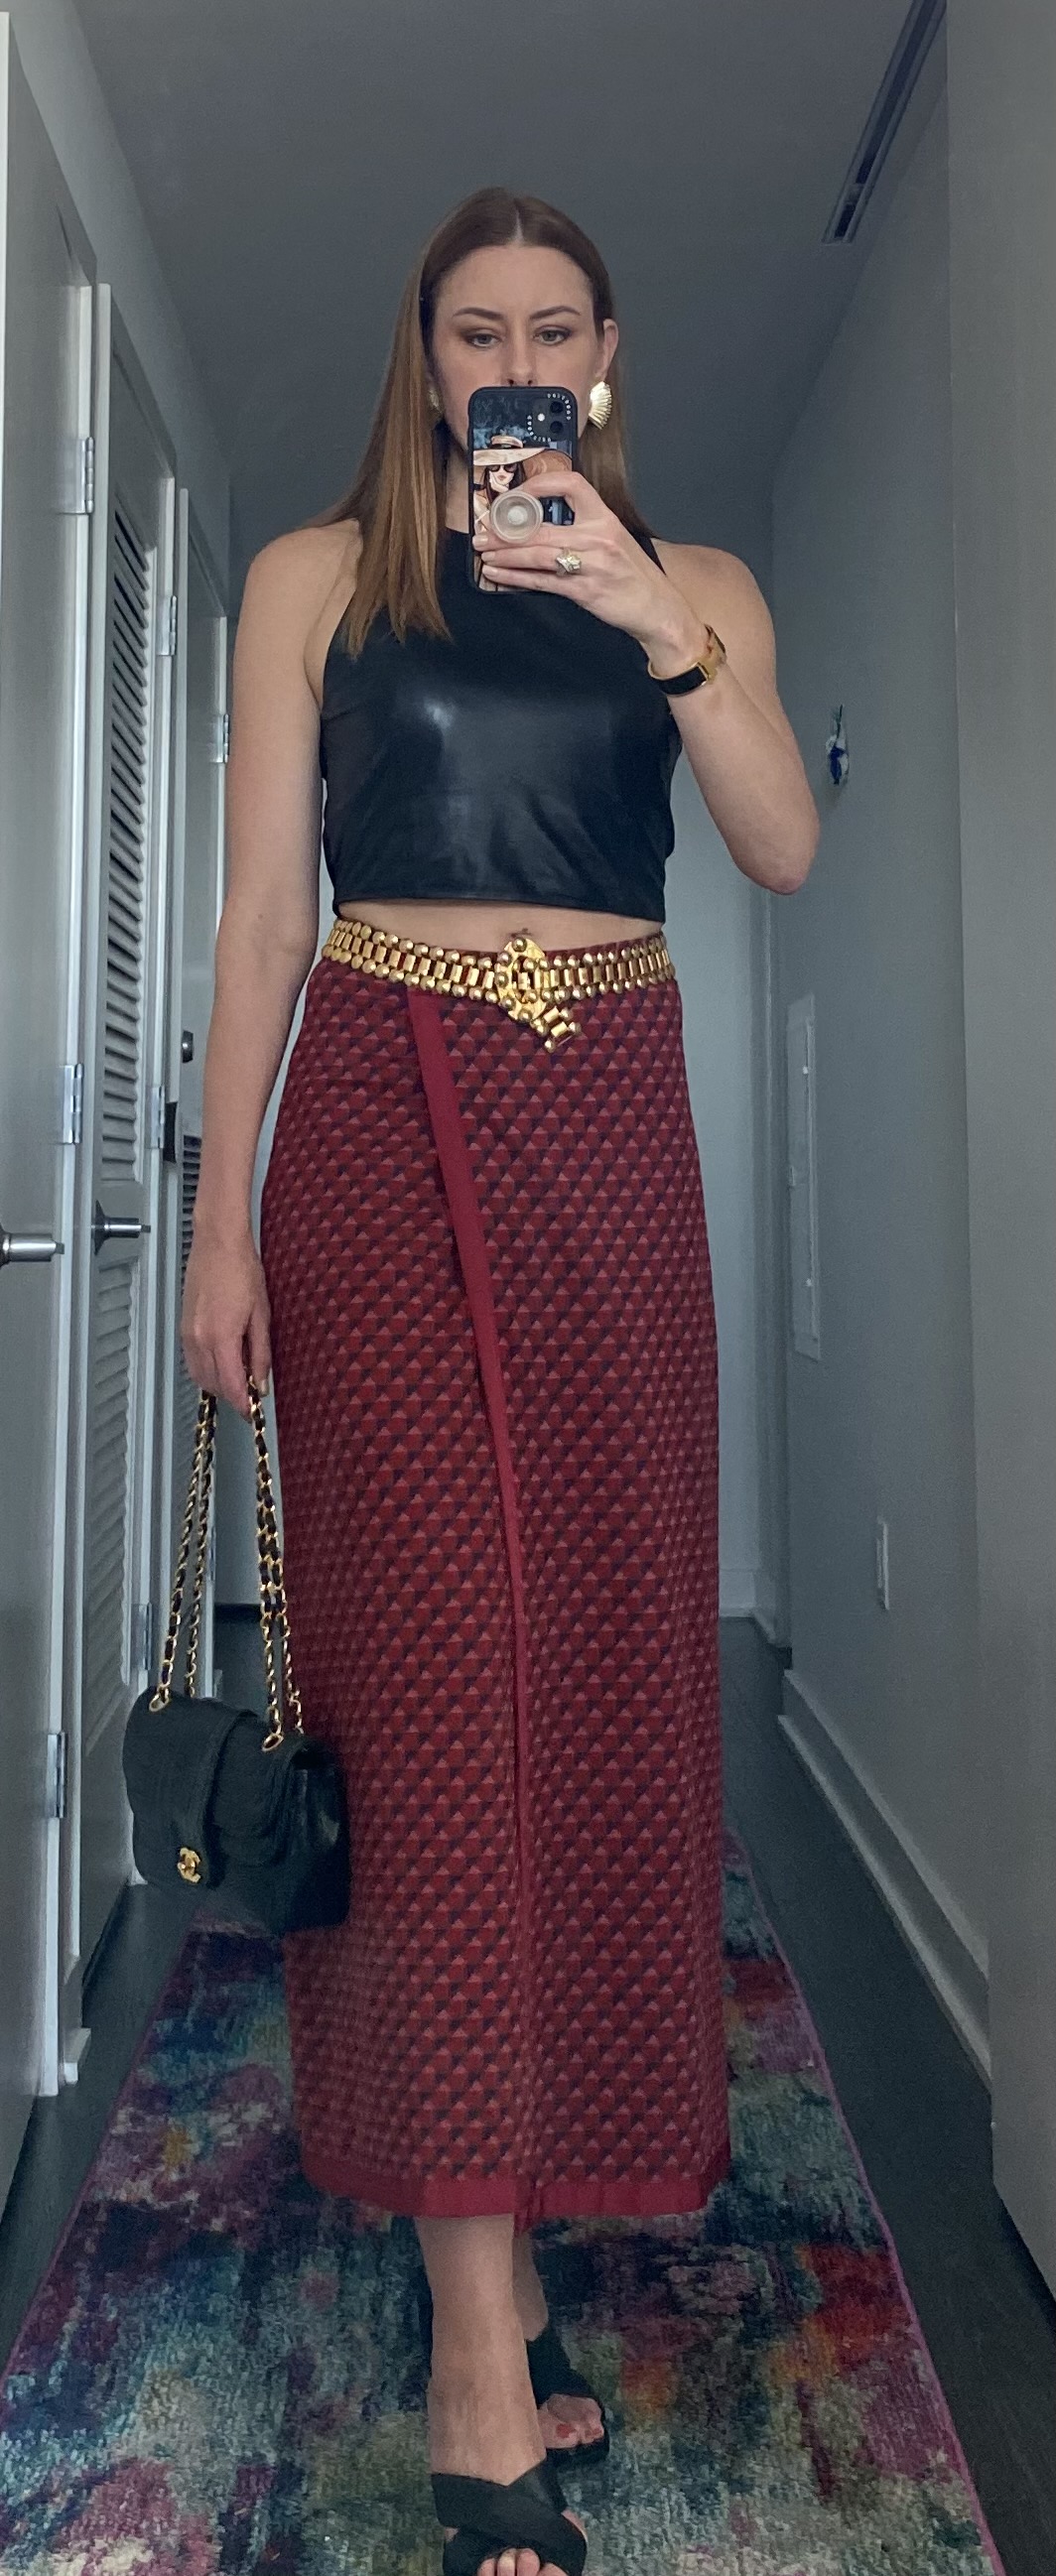 Women wearing red printed skirt with leather crop top and gold belt